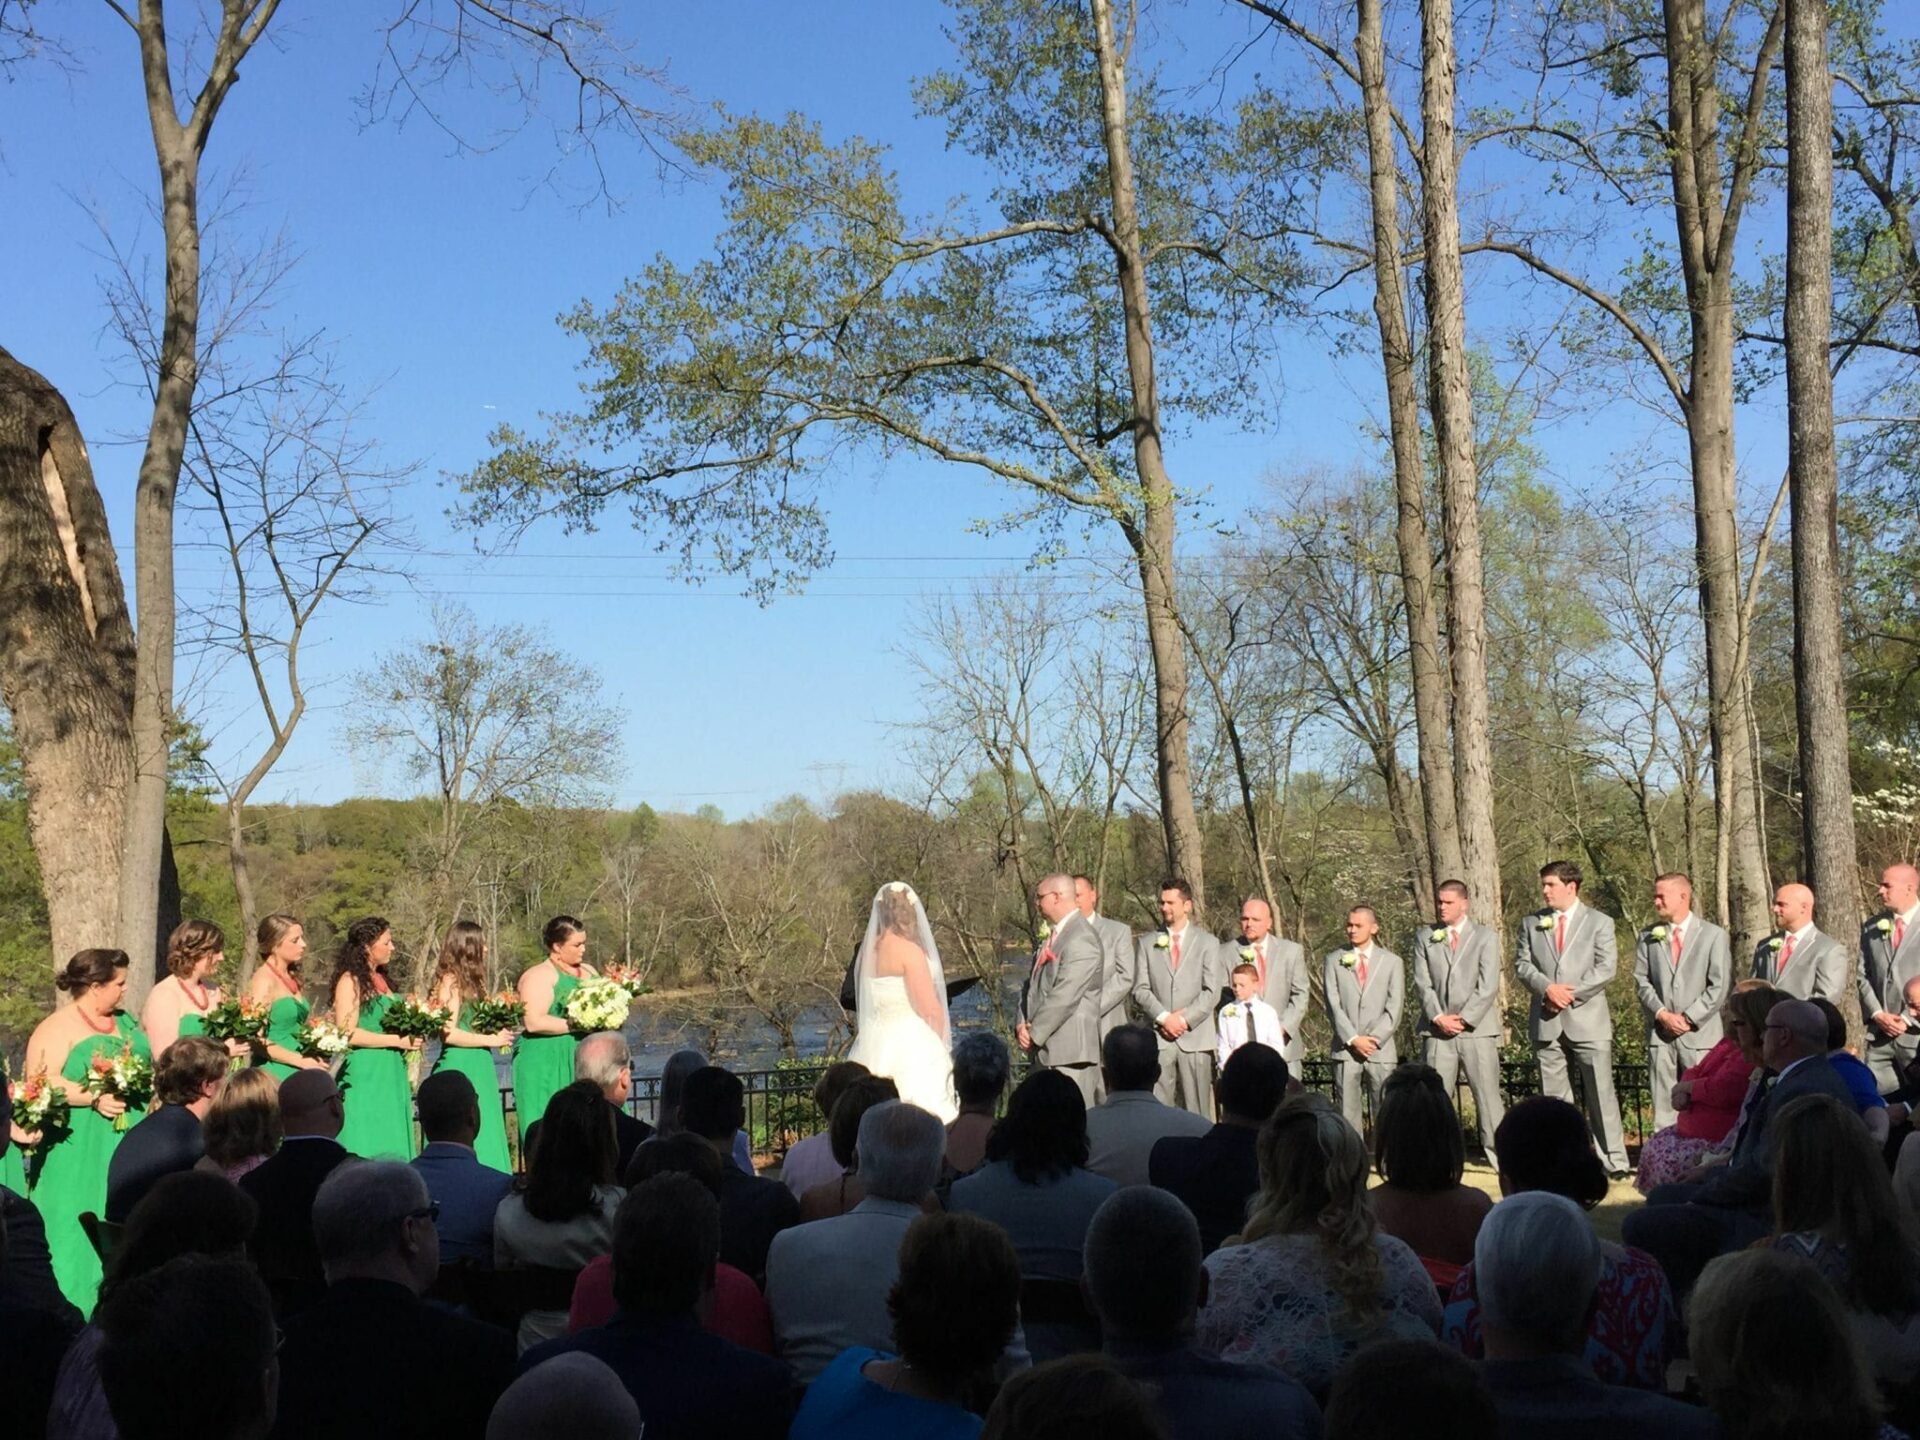 A group of people having a wedding ceremony in front of a tree at Brakefield River Walk.